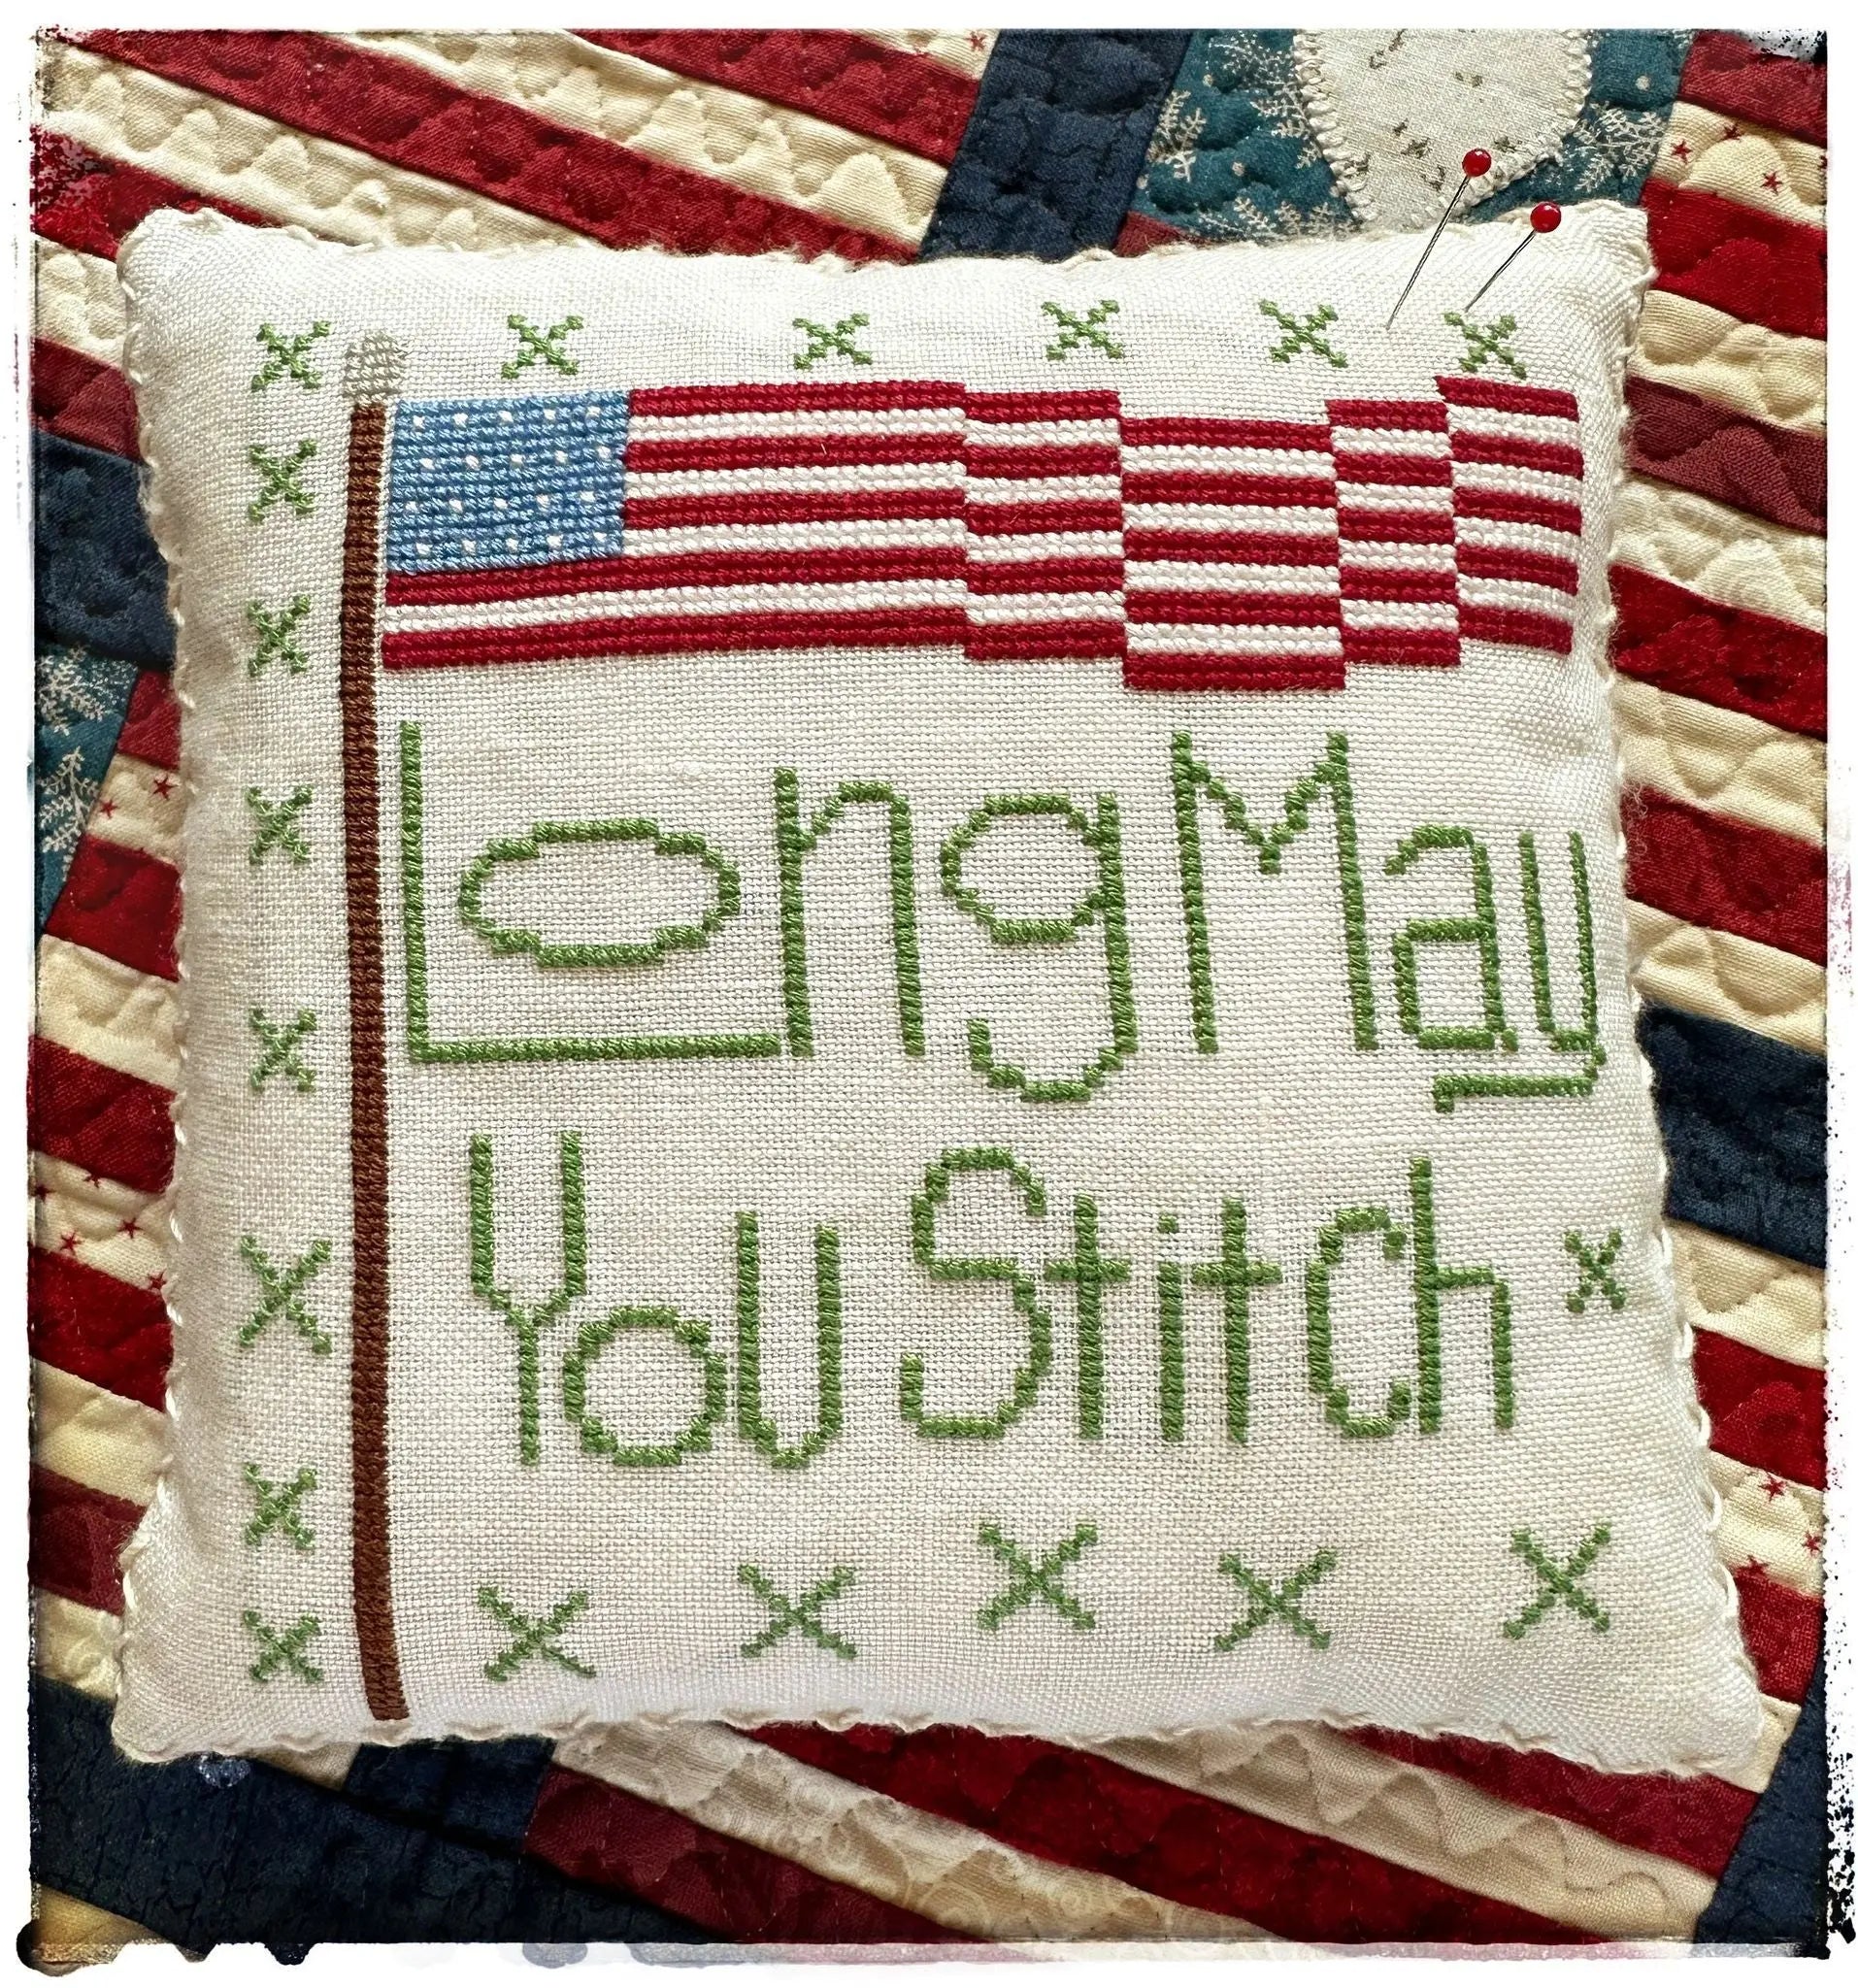 Long May You Stitch by Lucy Beam (Pre-order) Lucy Beam